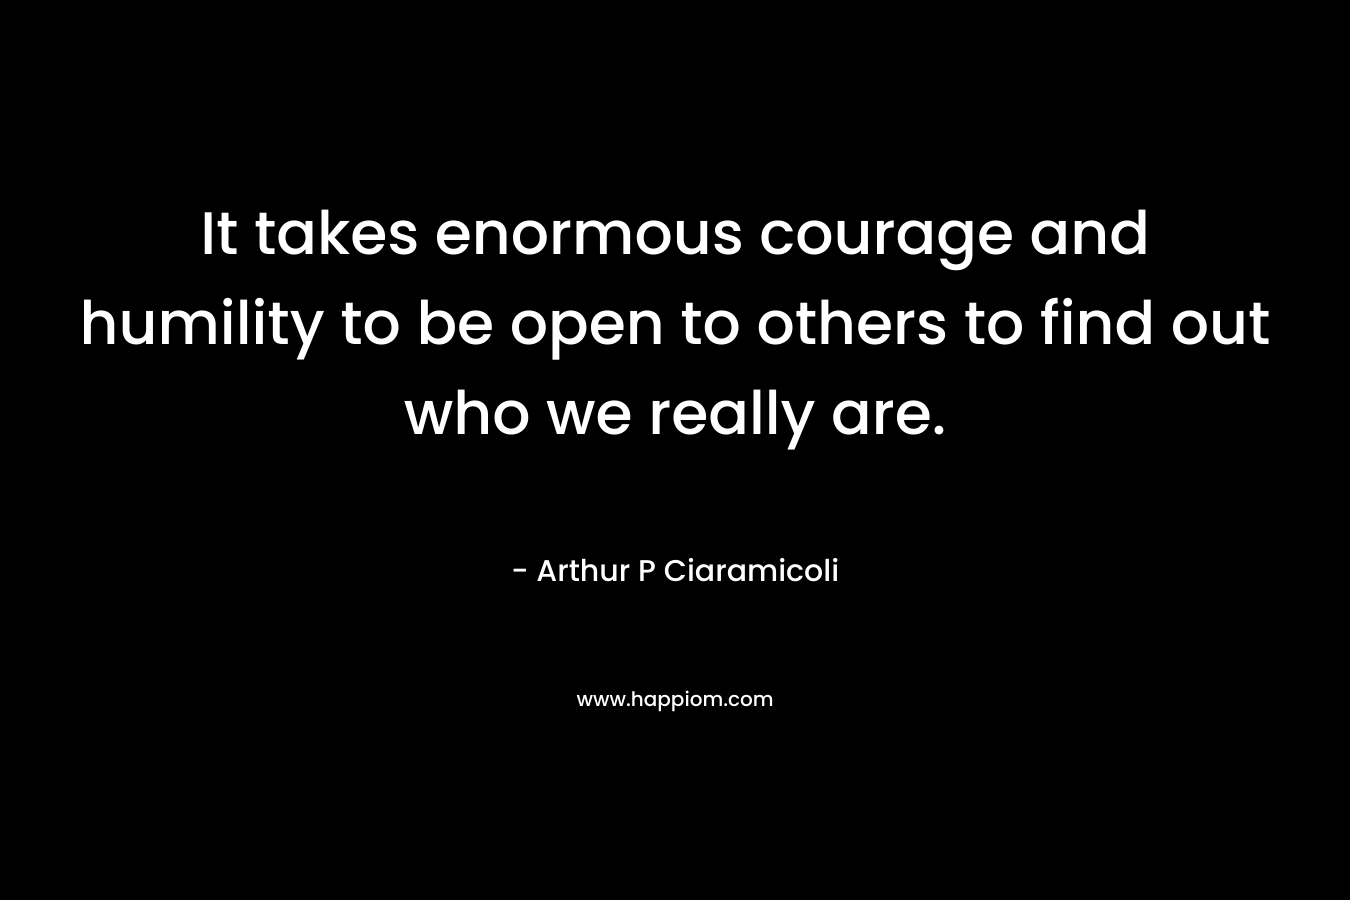 It takes enormous courage and humility to be open to others to find out who we really are.